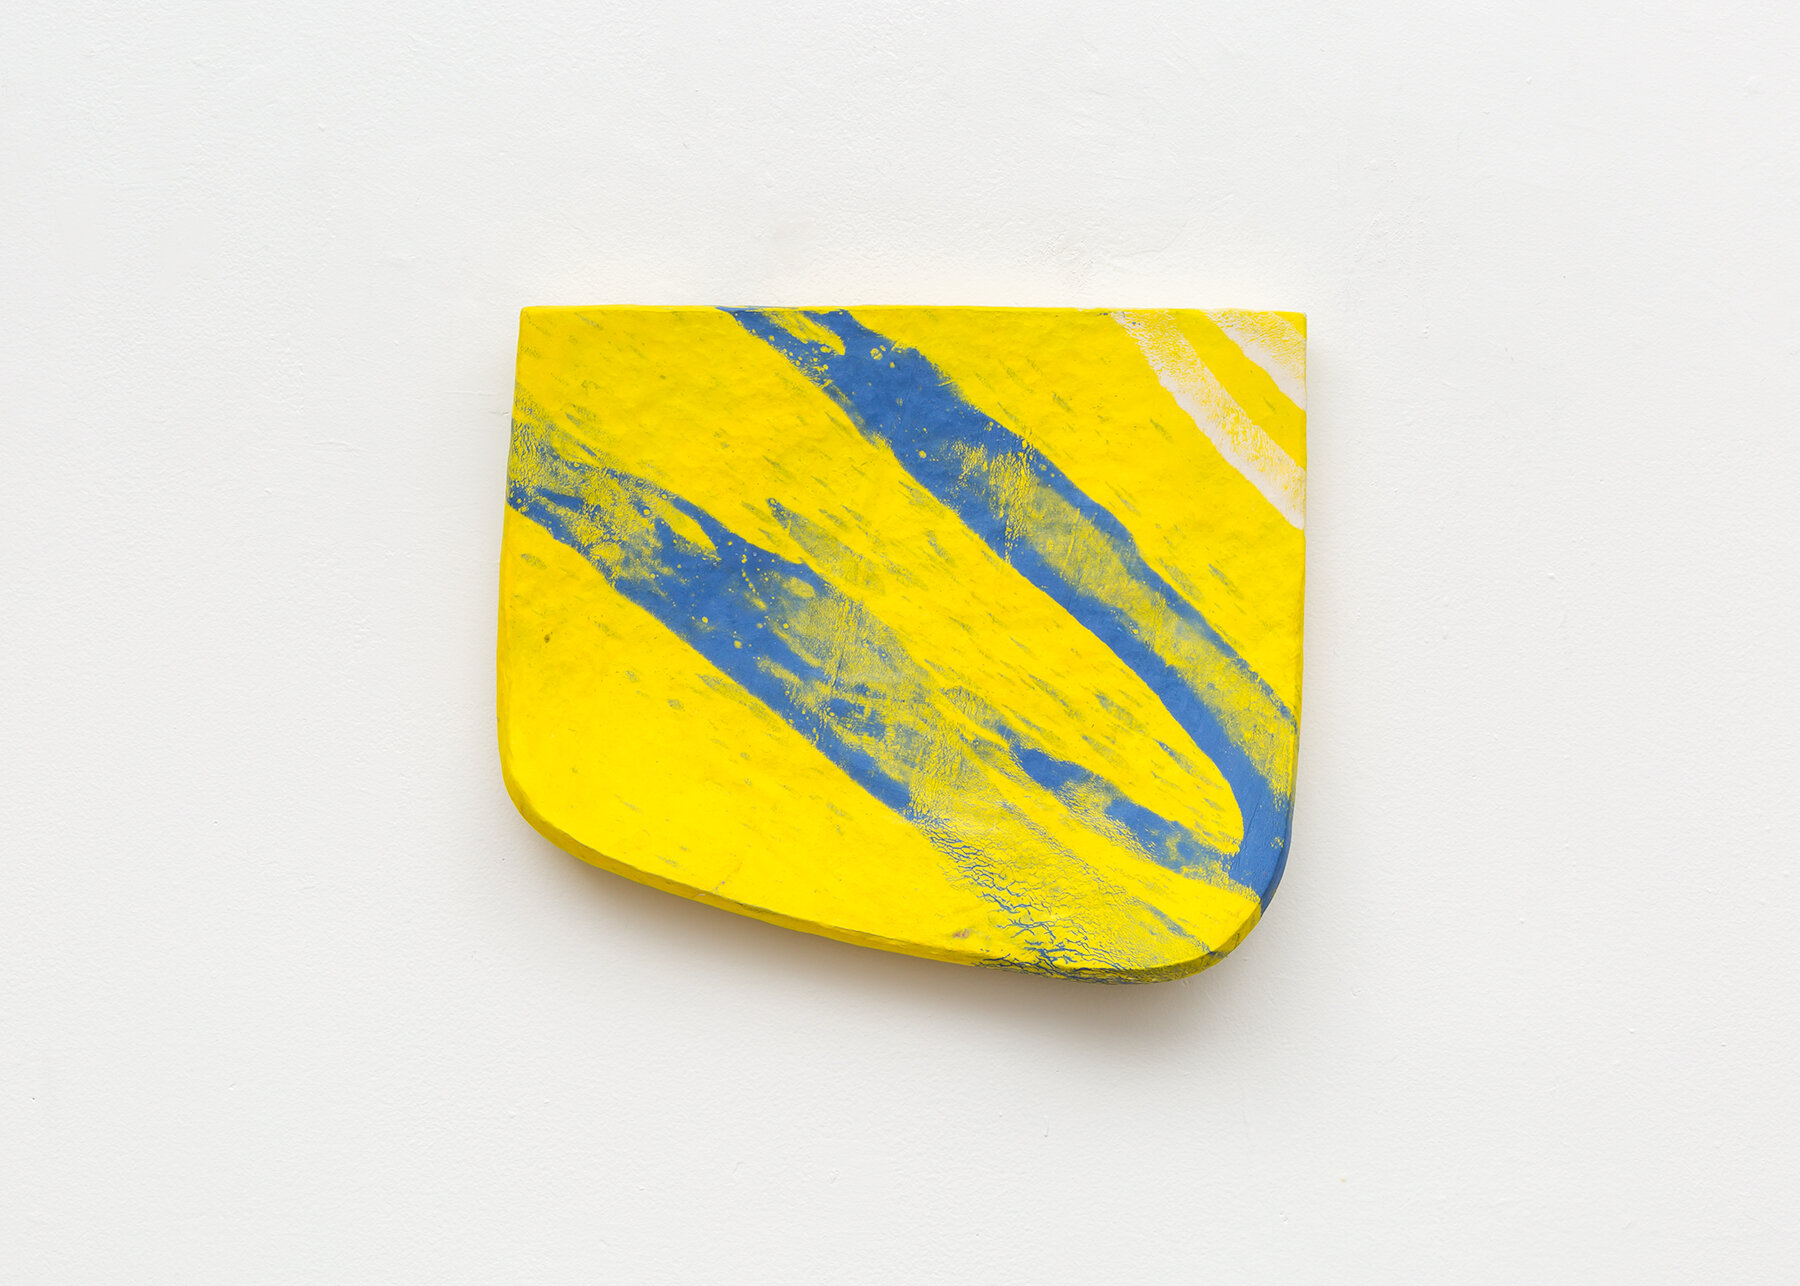   Ezra Tessler   Our blue-chinned future,  2019 Cast cotton, abaca, and pulp paint 12 x 13 x 2 inches 